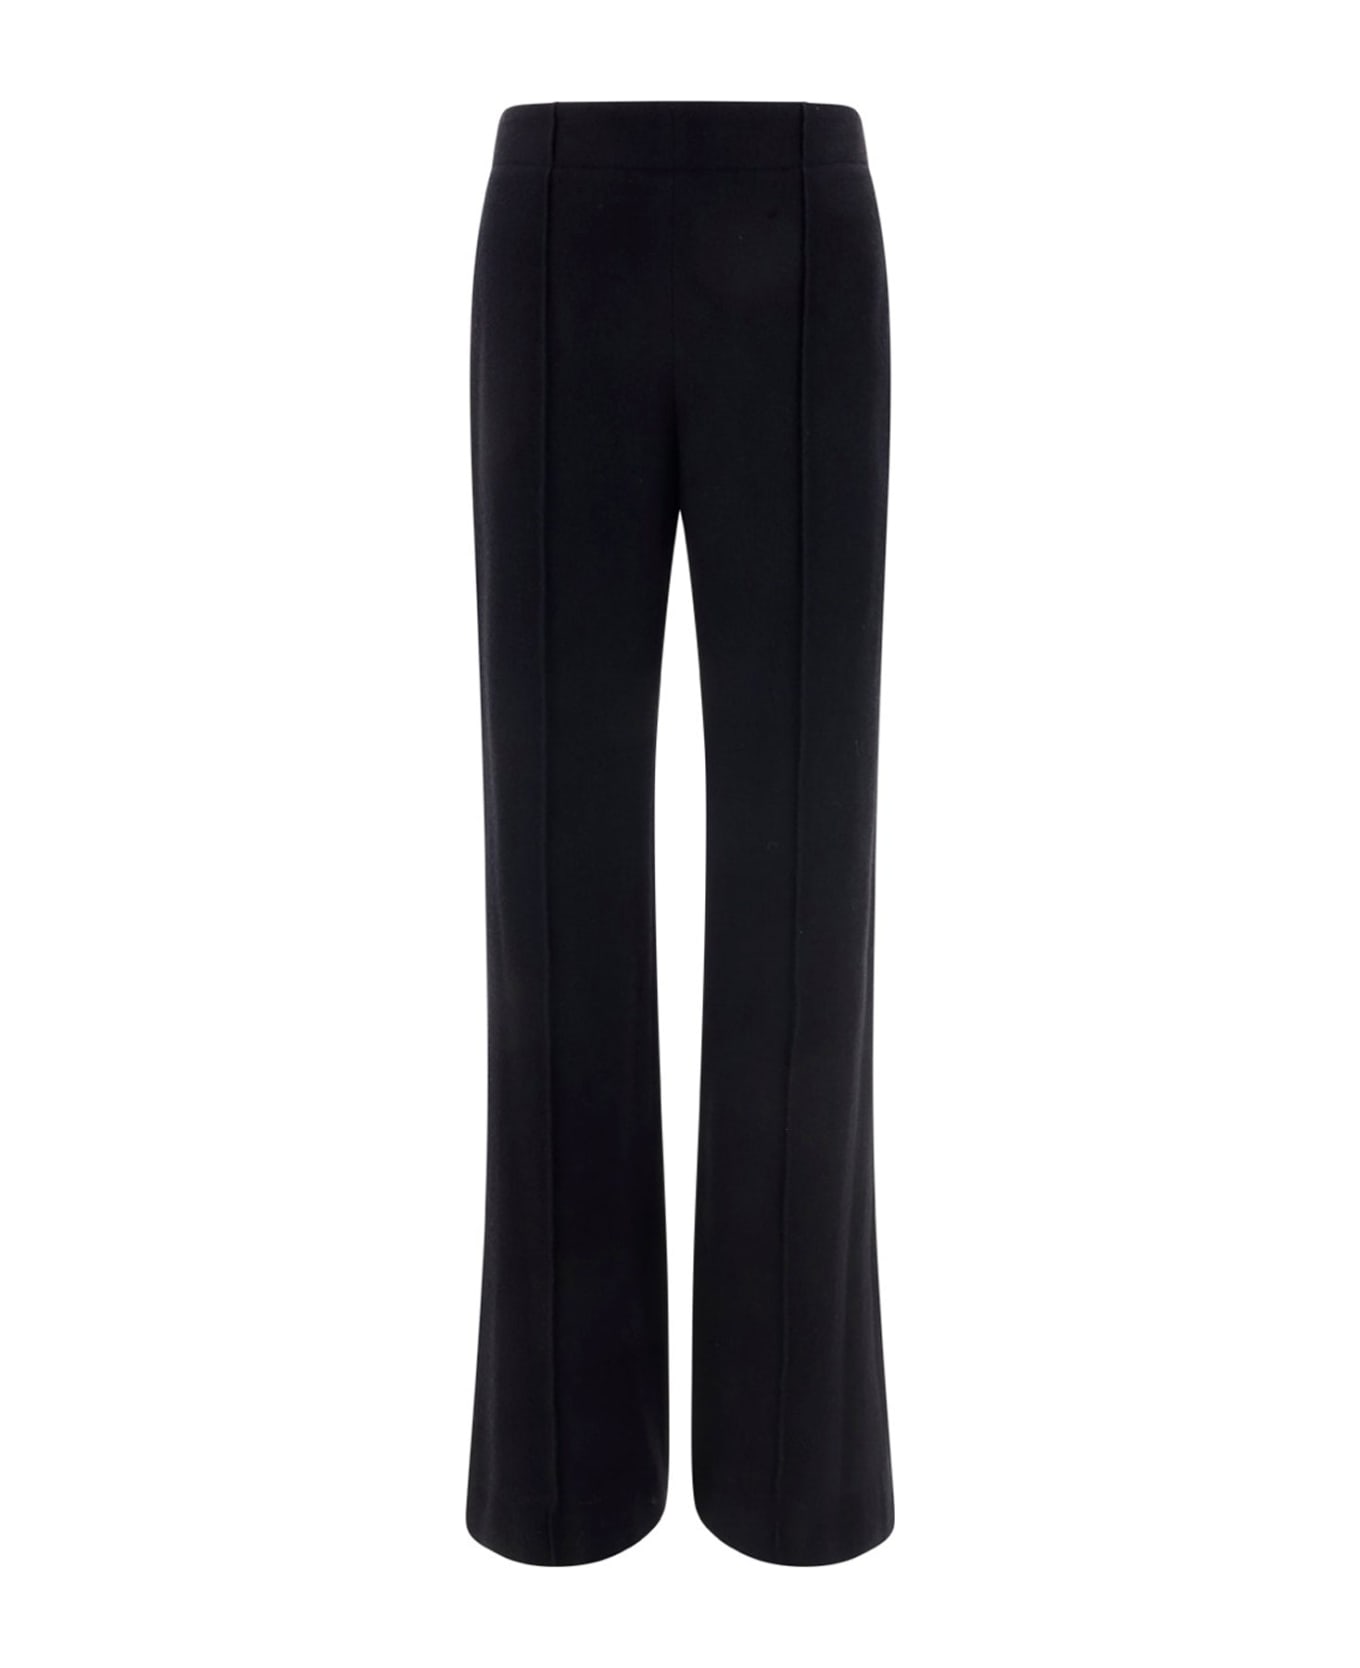 Chloé Wool And Cashmere Pants - Black